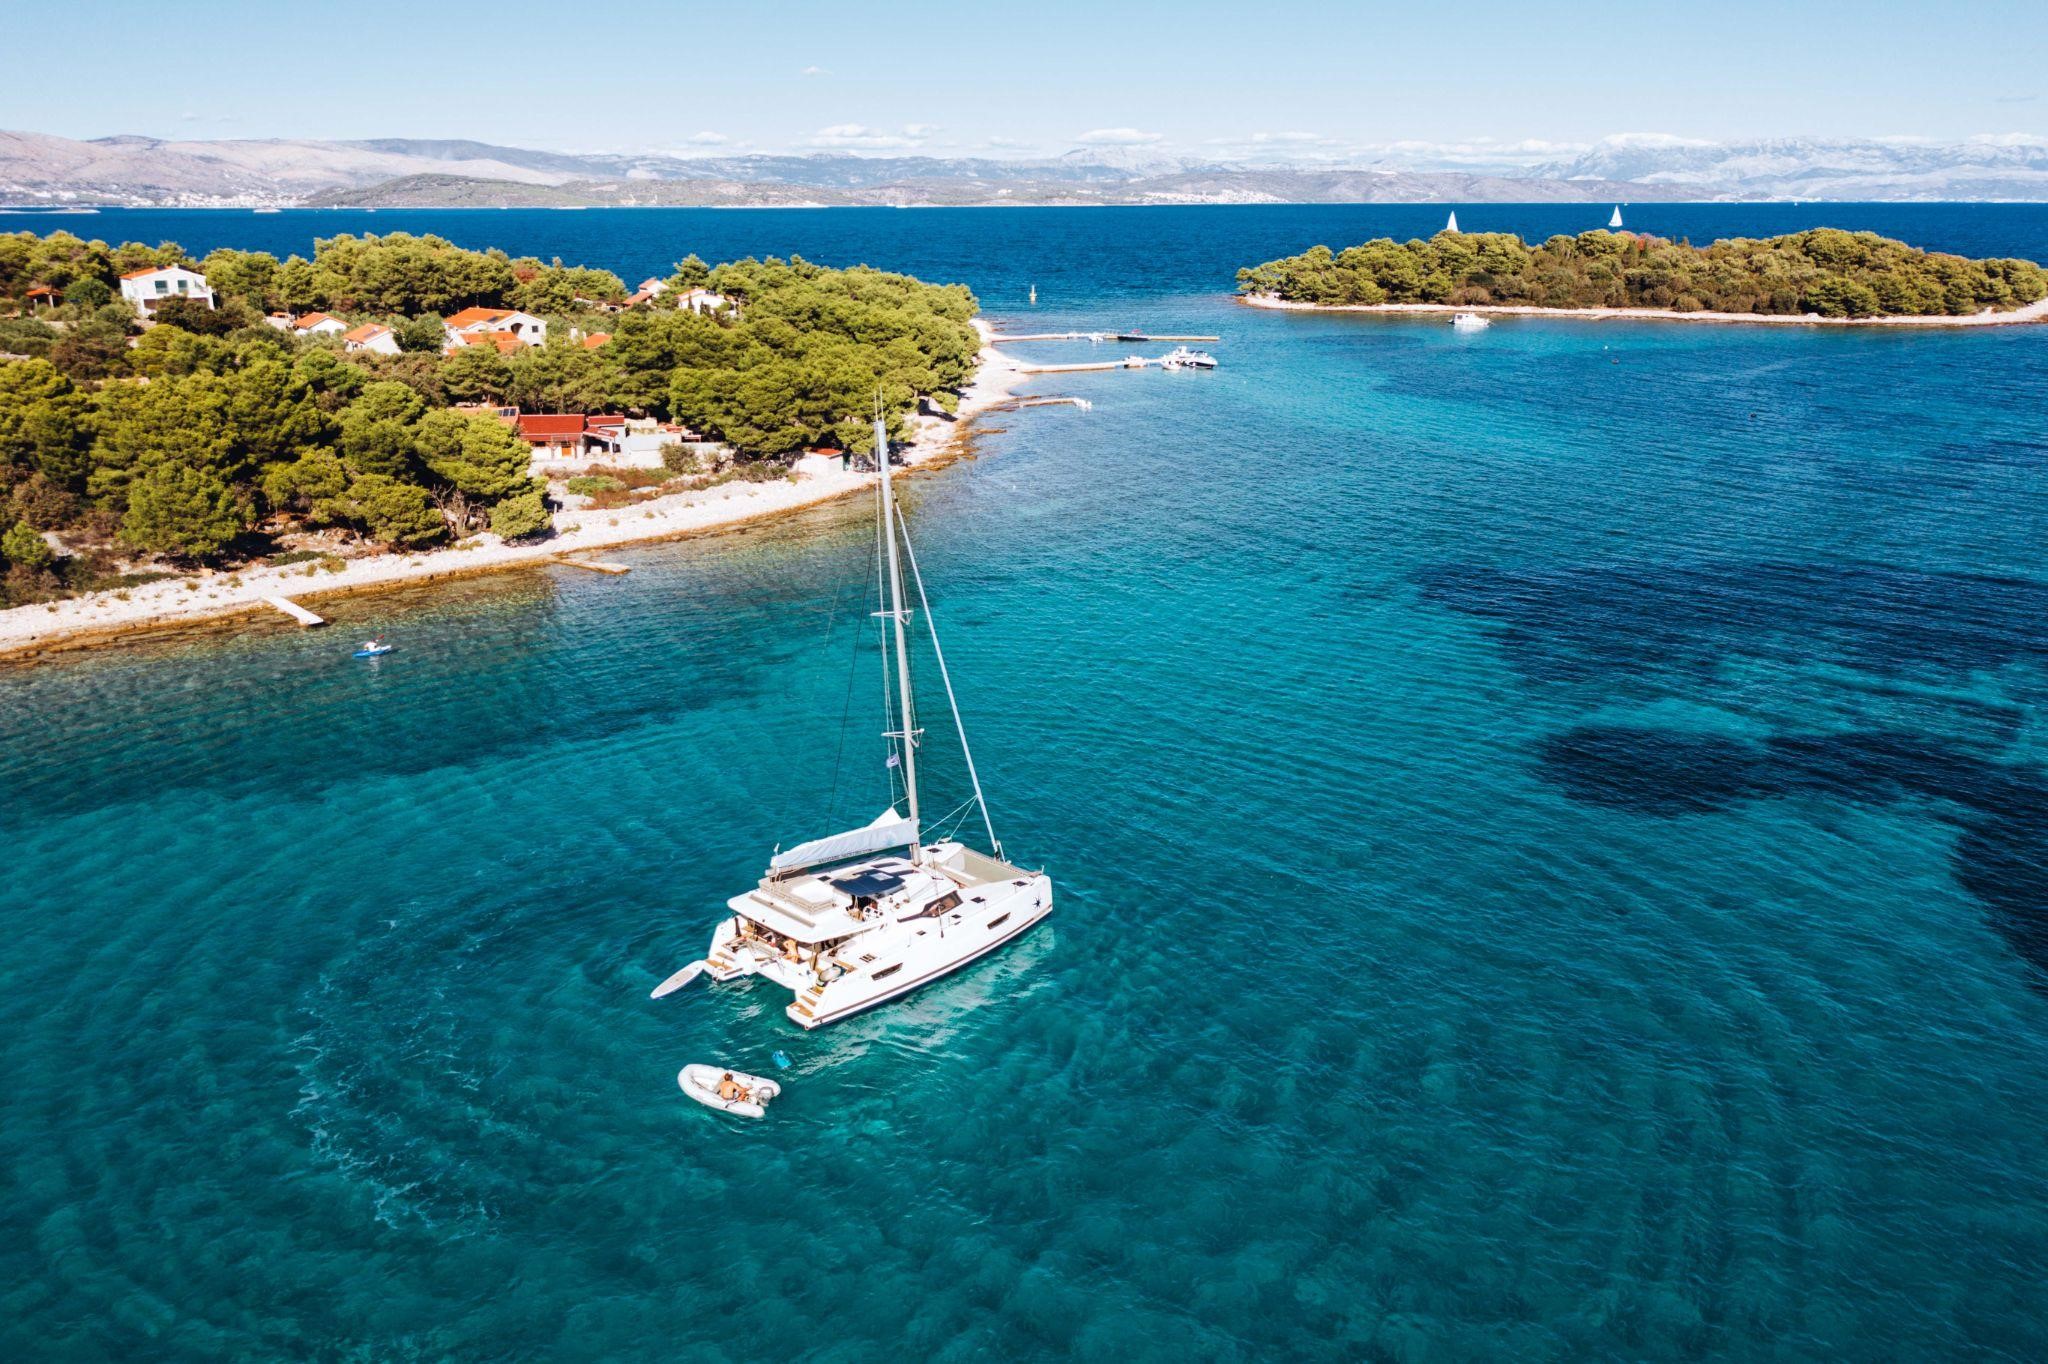 10 reasons to go on a sailing holiday